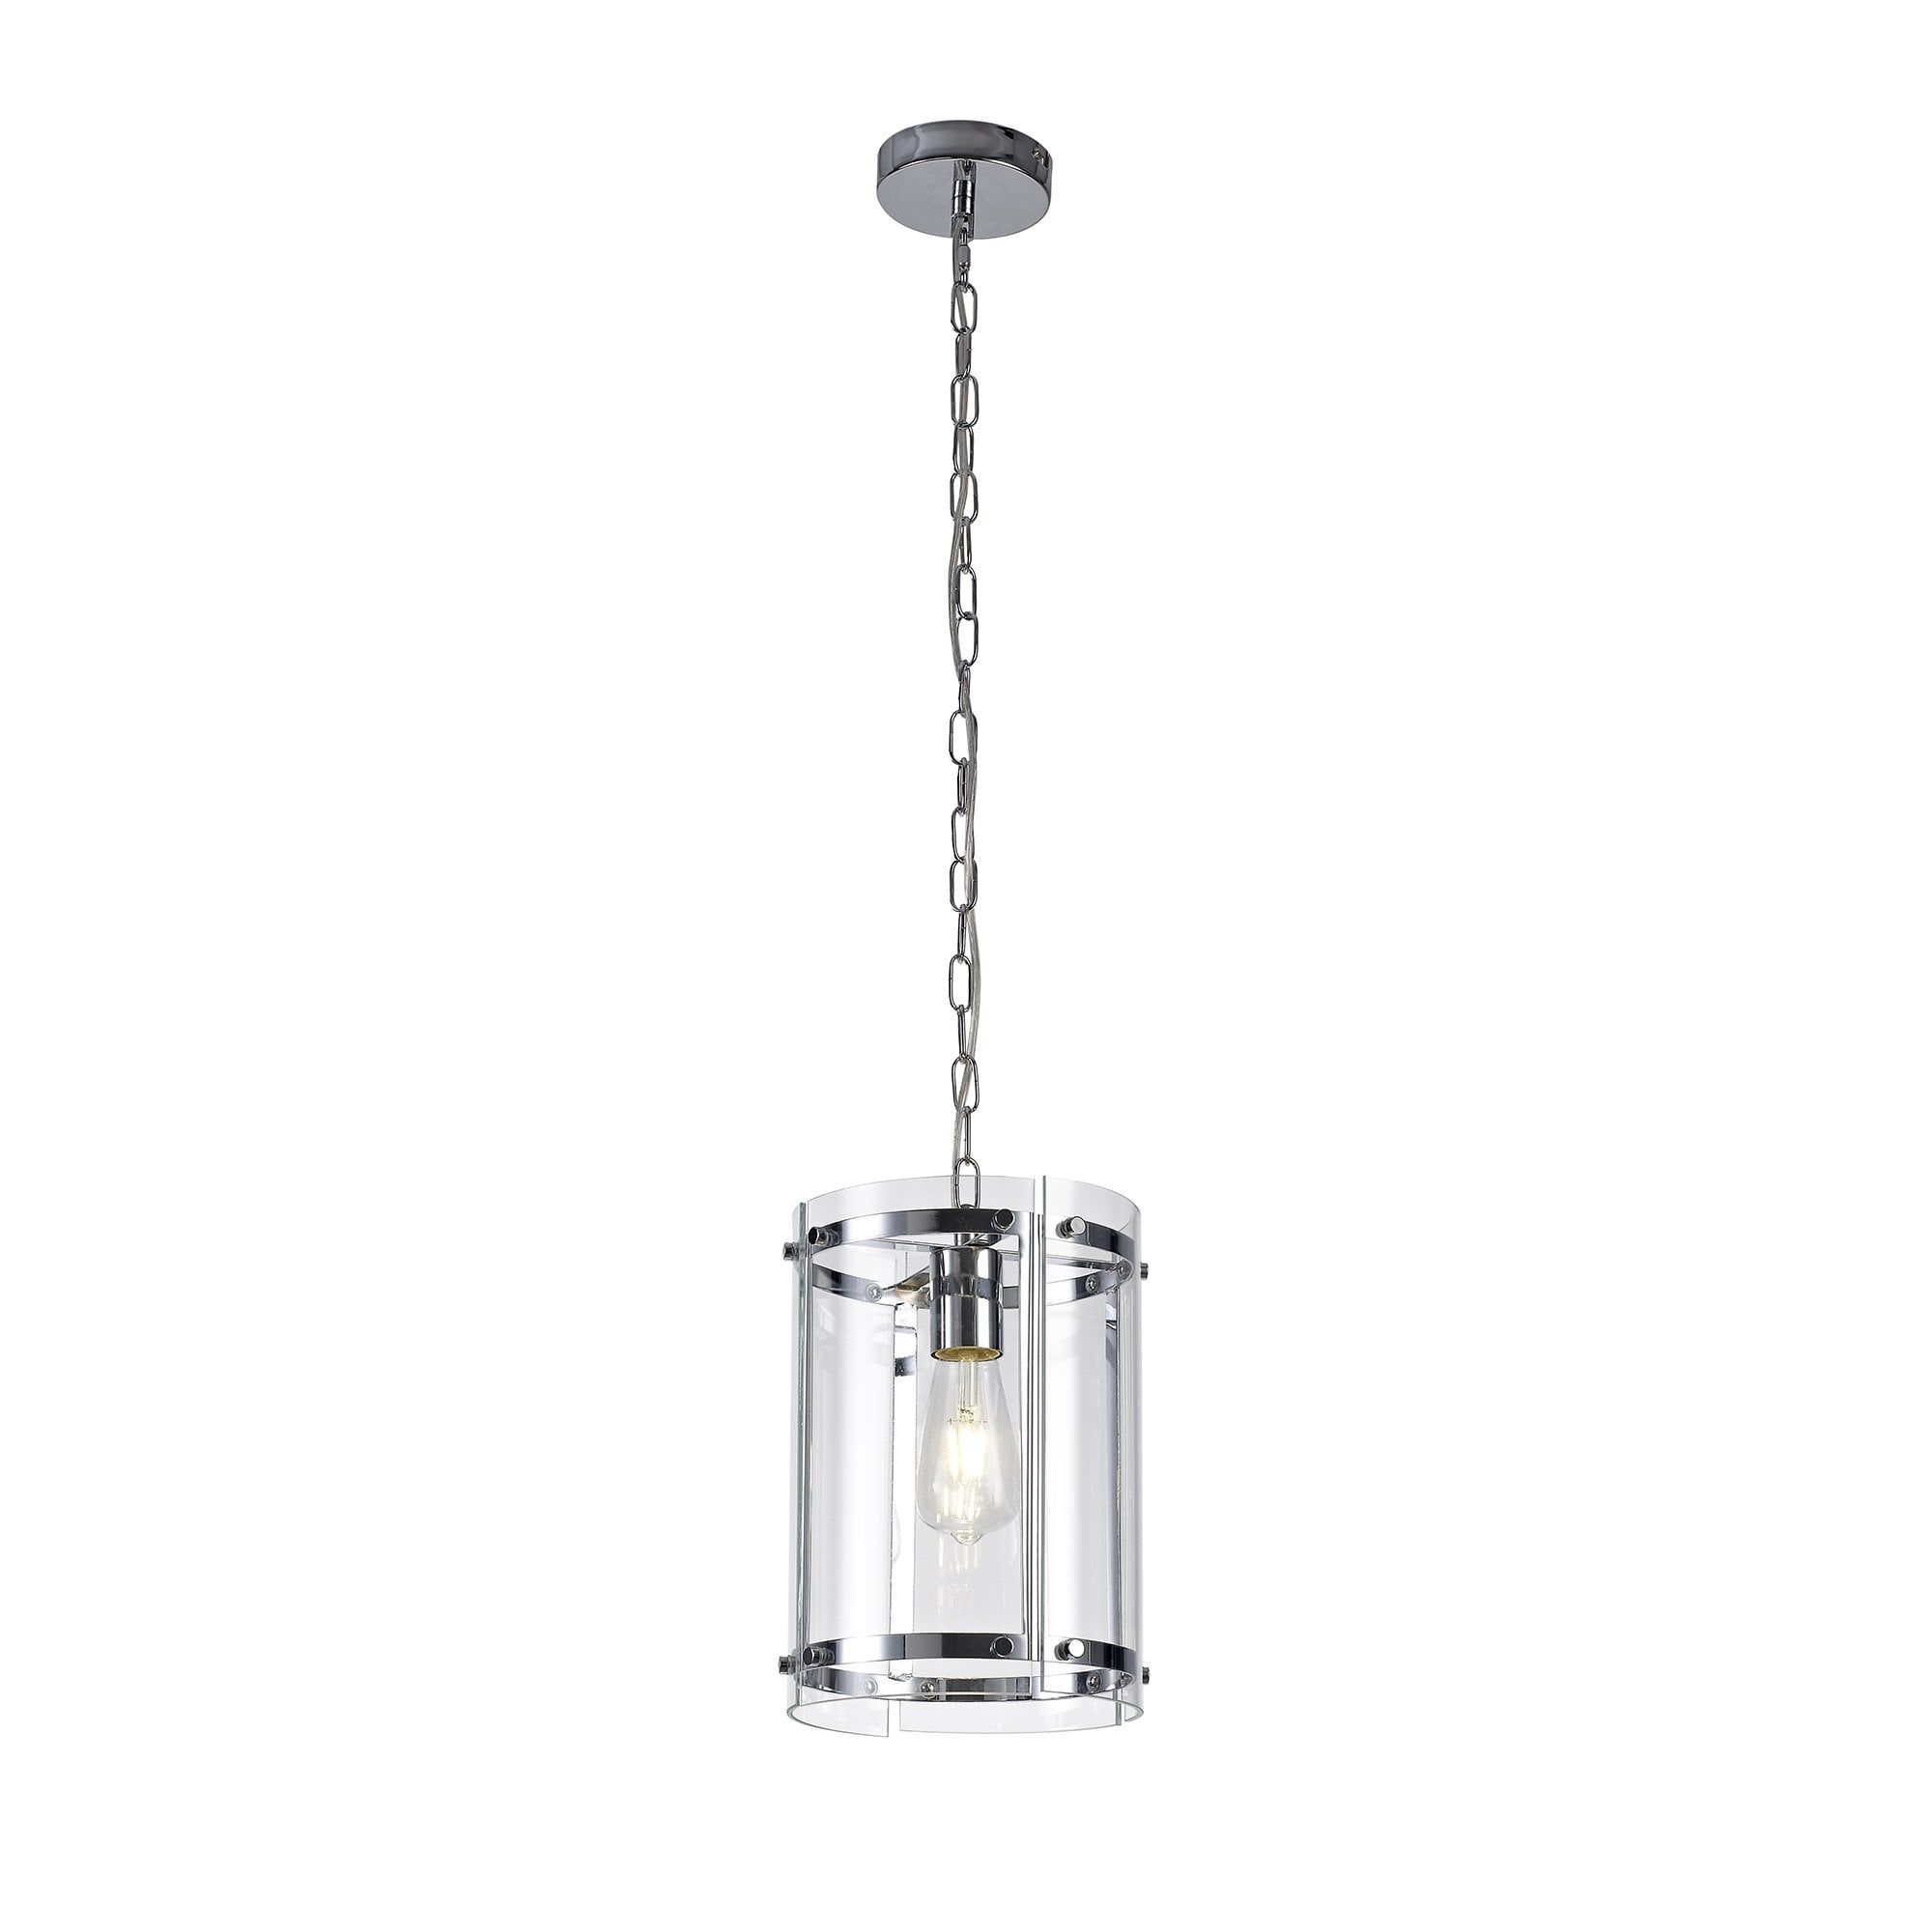 Ceiling Pendant Lantern In Polished Chrome With Glass Panels Intended For Chrome Lantern Chandeliers (View 3 of 15)